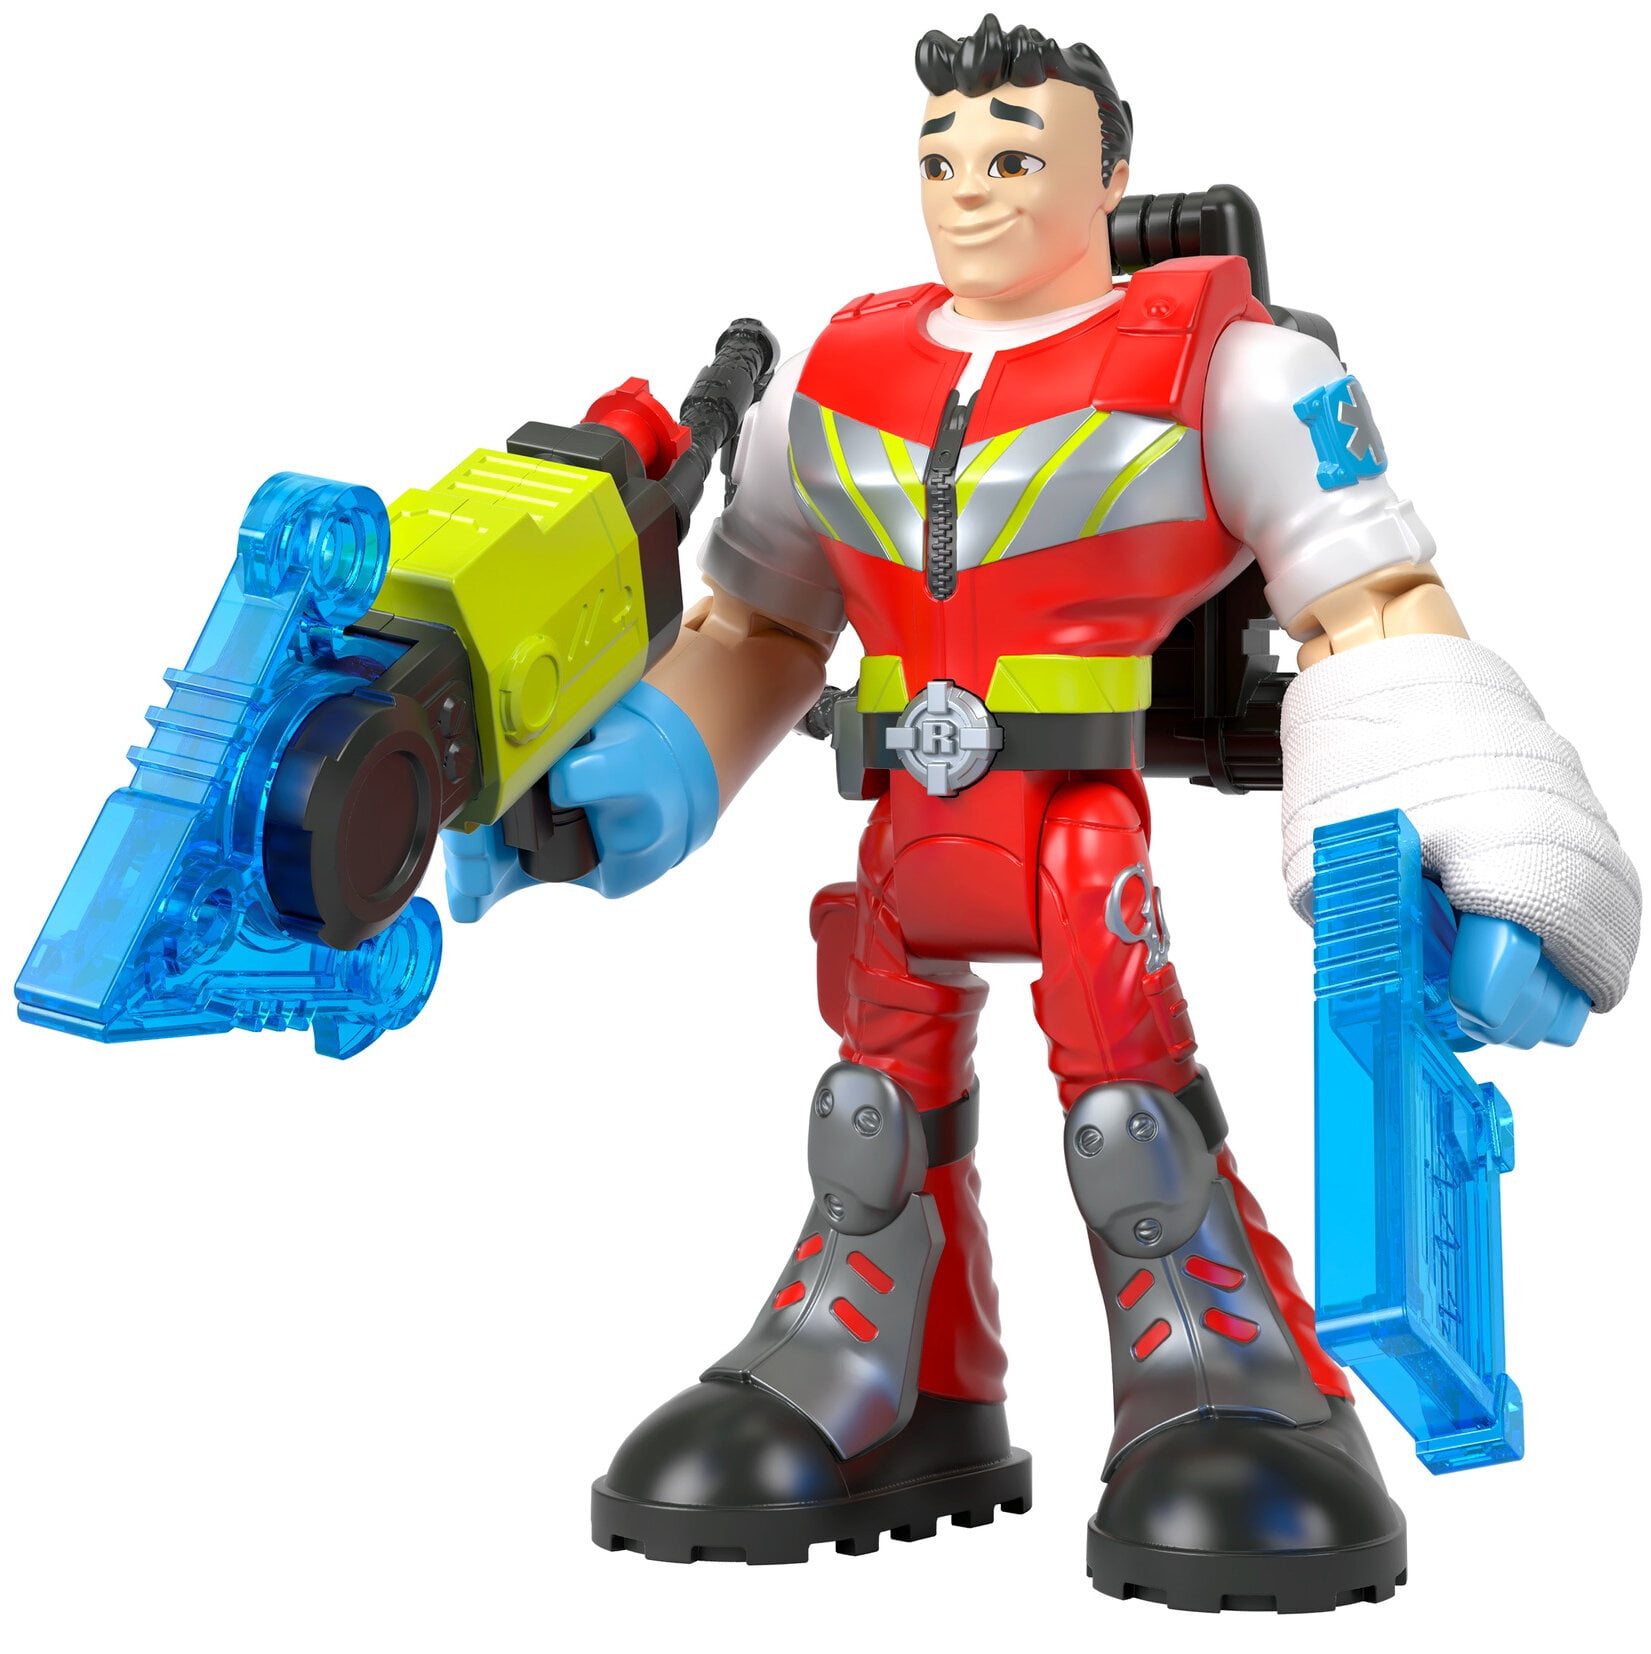 Fisher-Price Rescue Heroes Rocky Canyon Figure Set - Walmart.com